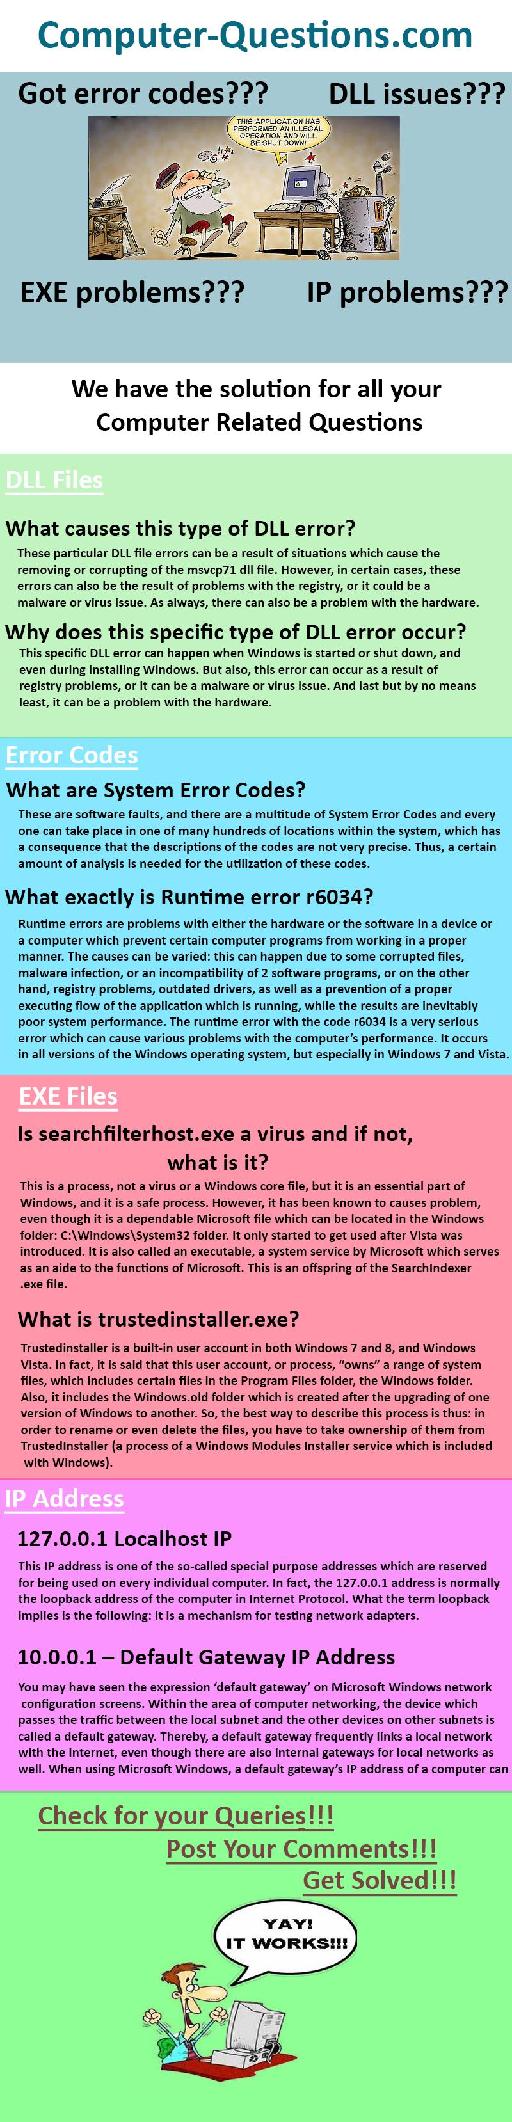 Infographics of computer questions.